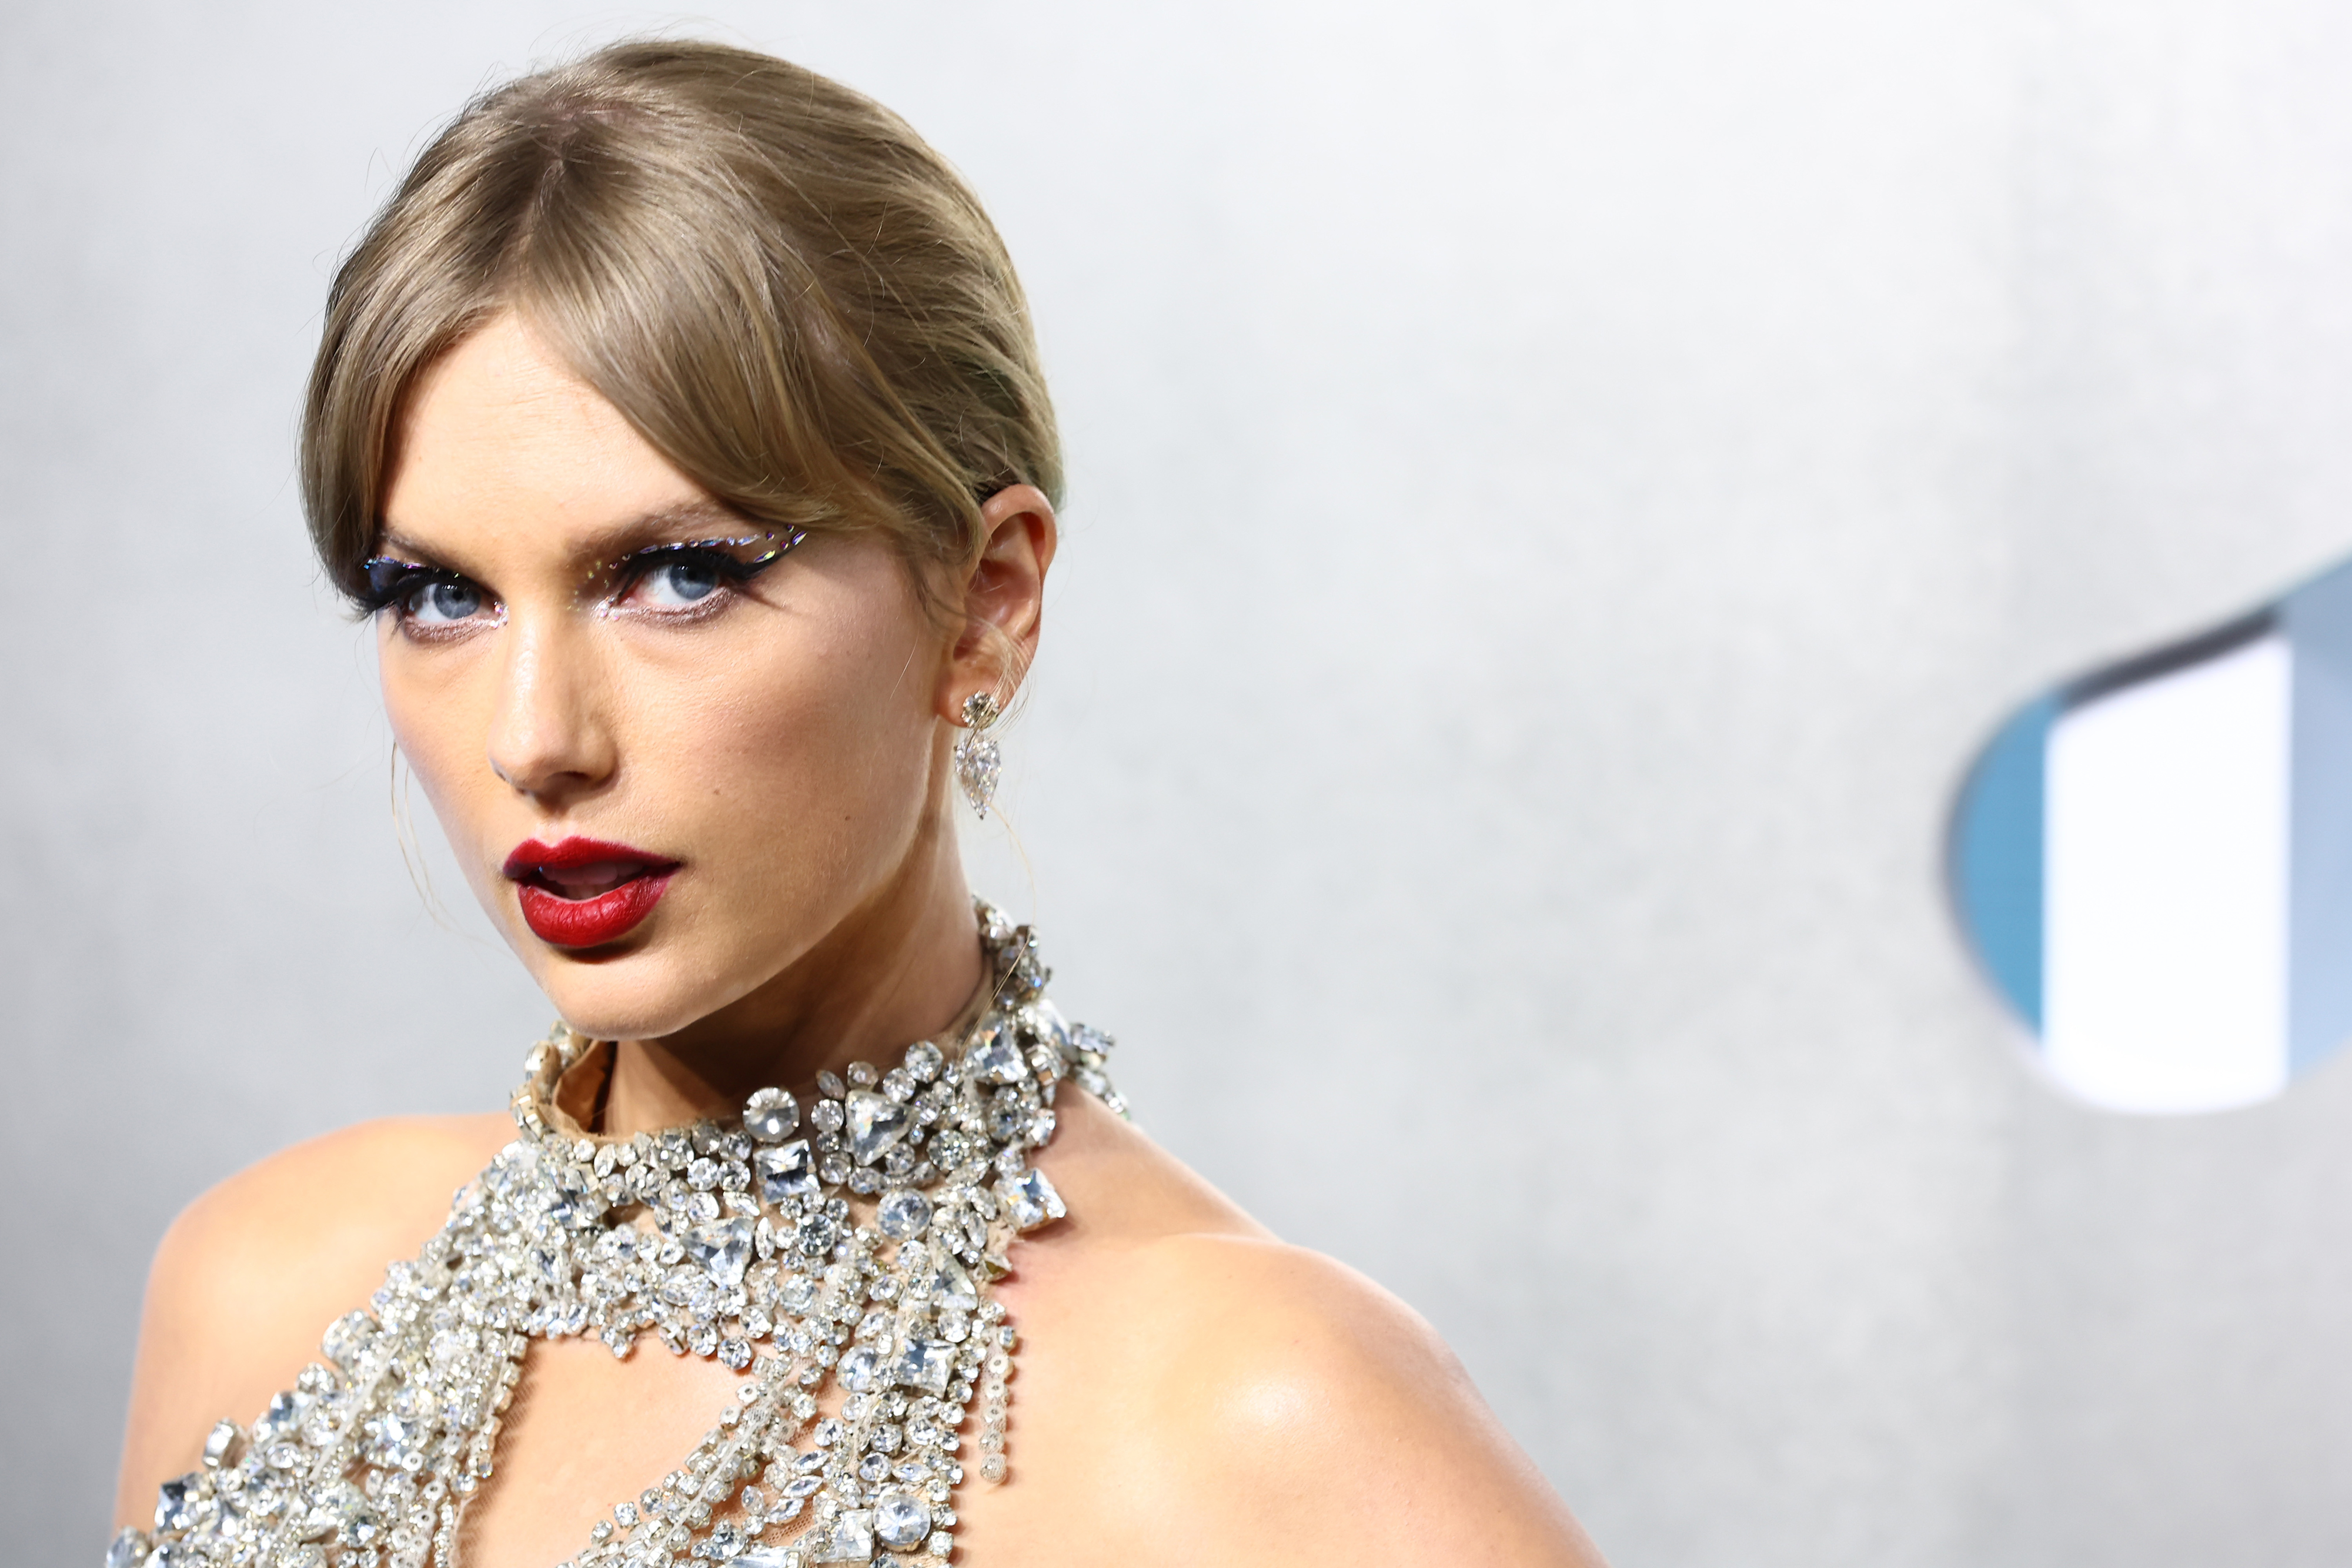 Taylor Swift wearing a sparkling bejeweled necklace and dramatic makeup, posing at an event